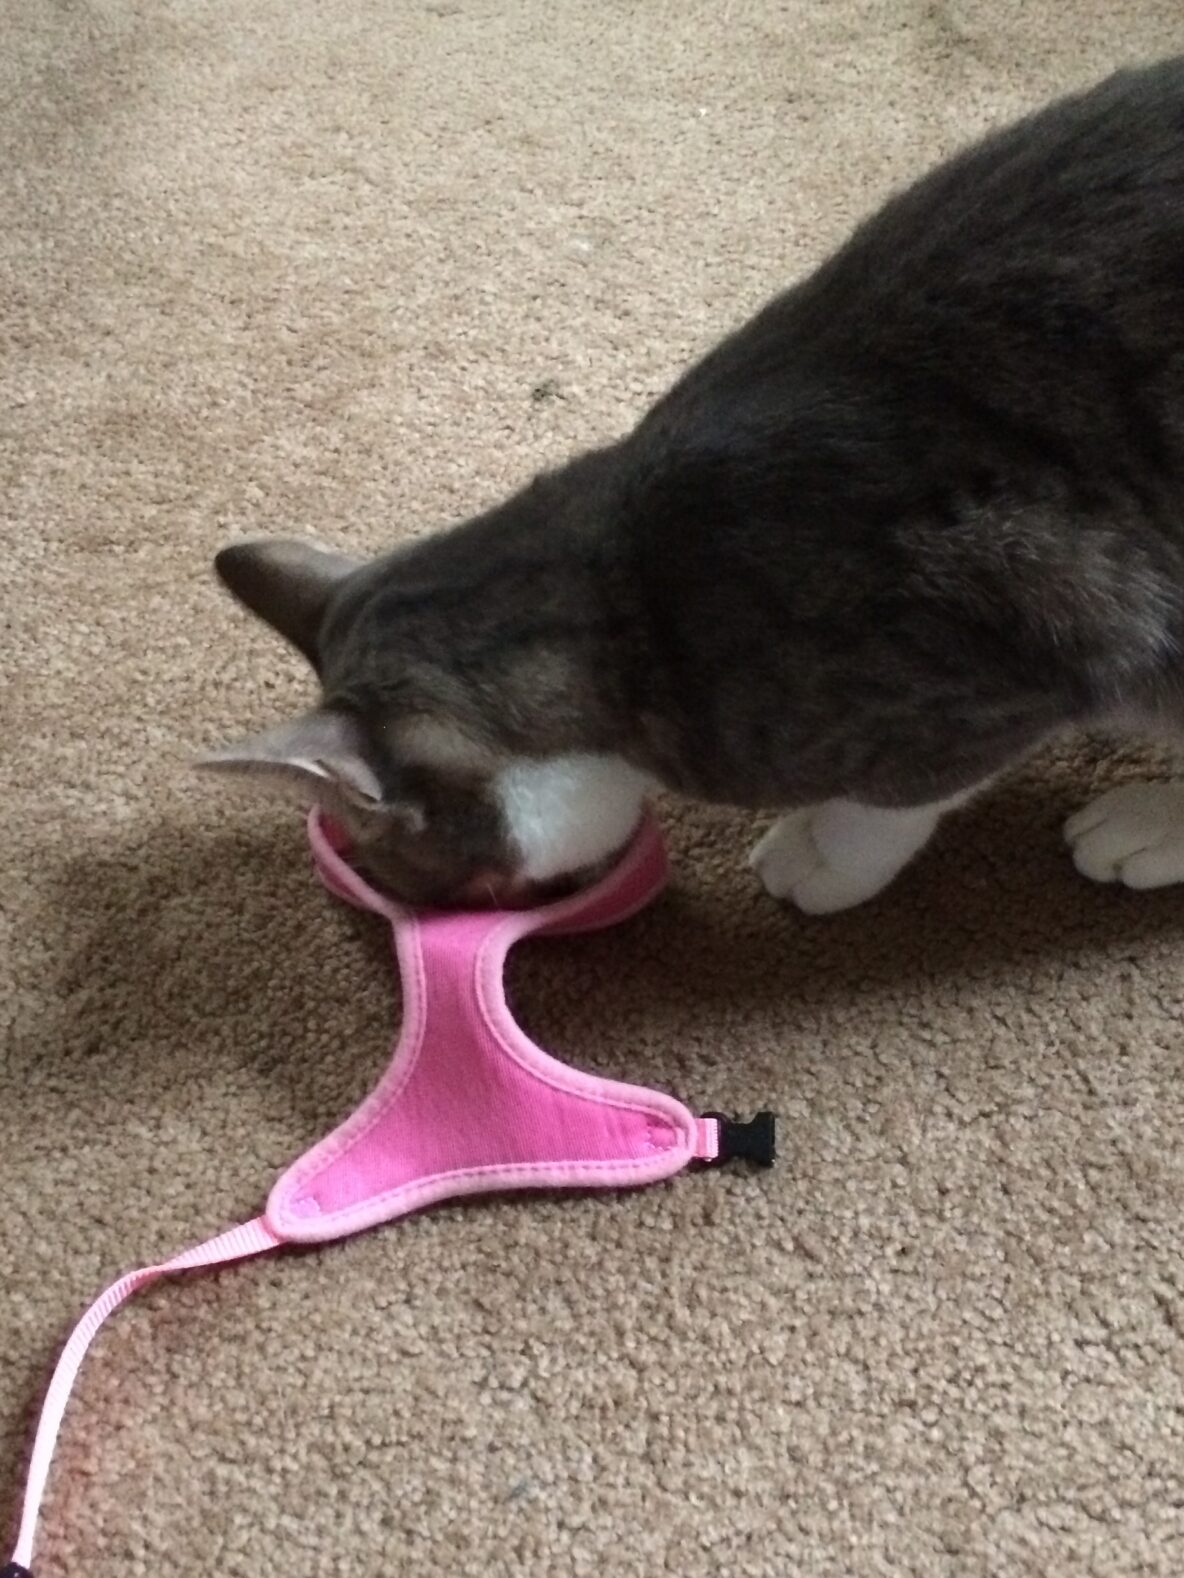 A cat eating a treat that is in the harness's collar